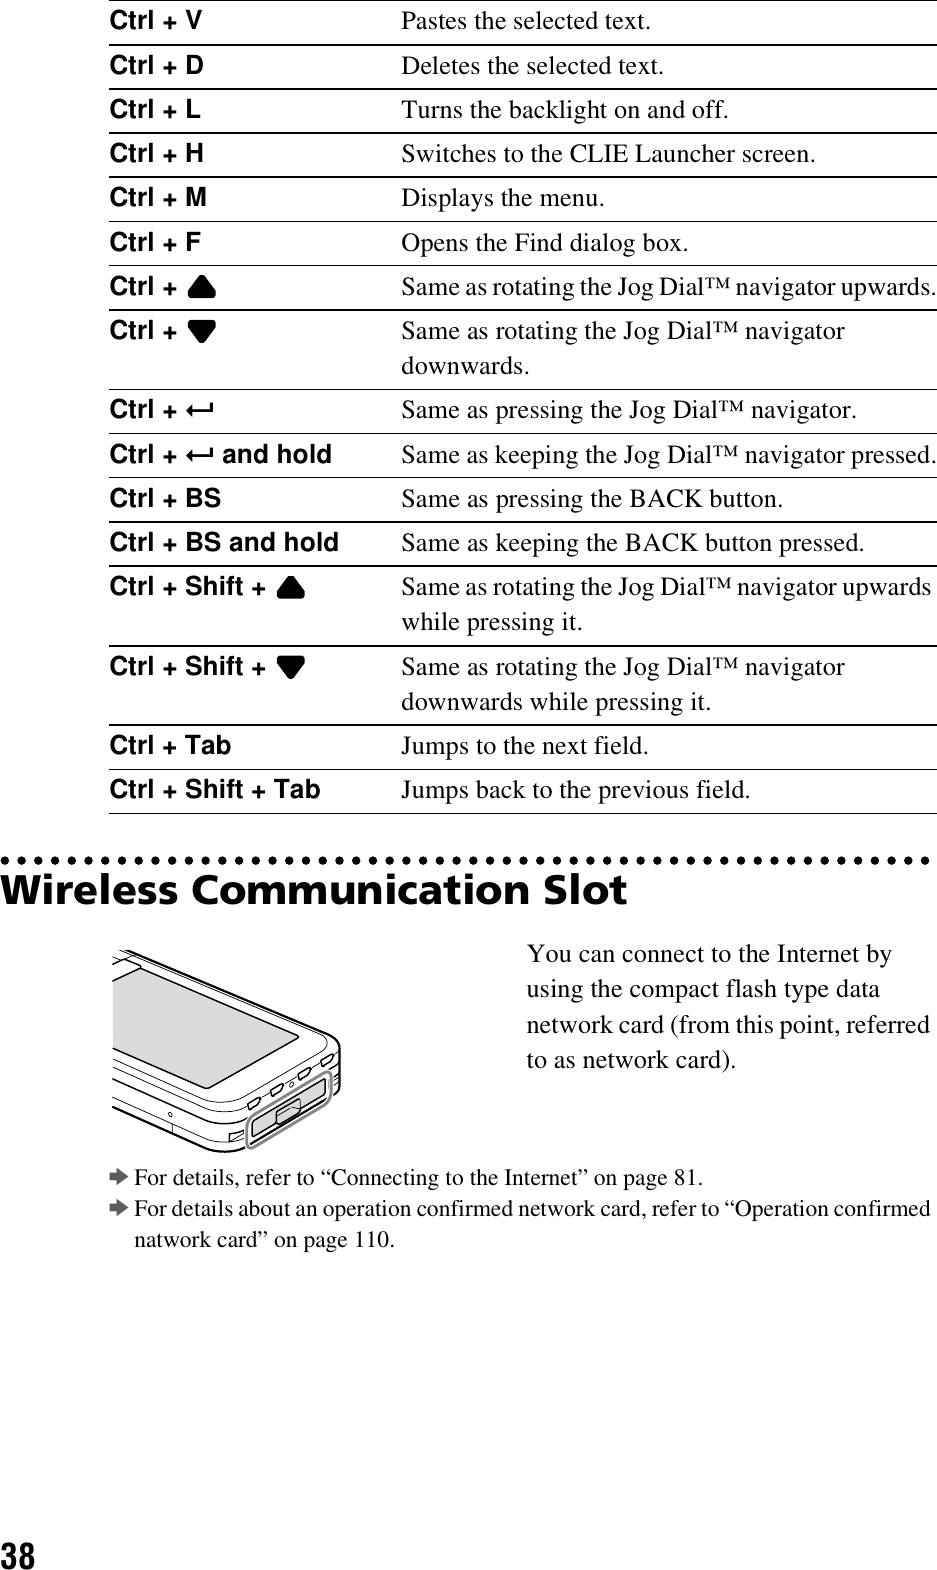 38Wireless Communication SlotbFor details, refer to “Connecting to the Internet” on page 81.bFor details about an operation confirmed network card, refer to “Operation confirmed natwork card” on page 110.Ctrl + V Pastes the selected text.Ctrl + D Deletes the selected text.Ctrl + L Turns the backlight on and off.Ctrl + H Switches to the CLIE Launcher screen.Ctrl + M Displays the menu.Ctrl + F Opens the Find dialog box.Ctrl +  Same as rotating the Jog Dial™ navigator upwards.Ctrl +  Same as rotating the Jog Dial™ navigator downwards.Ctrl + 3Same as pressing the Jog Dial™ navigator.Ctrl + 3 and hold Same as keeping the Jog Dial™ navigator pressed.Ctrl + BS Same as pressing the BACK button.Ctrl + BS and hold Same as keeping the BACK button pressed.Ctrl + Shift +  Same as rotating the Jog Dial™ navigator upwards while pressing it.Ctrl + Shift +  Same as rotating the Jog Dial™ navigator downwards while pressing it.Ctrl + Tab Jumps to the next field.Ctrl + Shift + Tab Jumps back to the previous field.You can connect to the Internet by using the compact flash type data network card (from this point, referred to as network card).